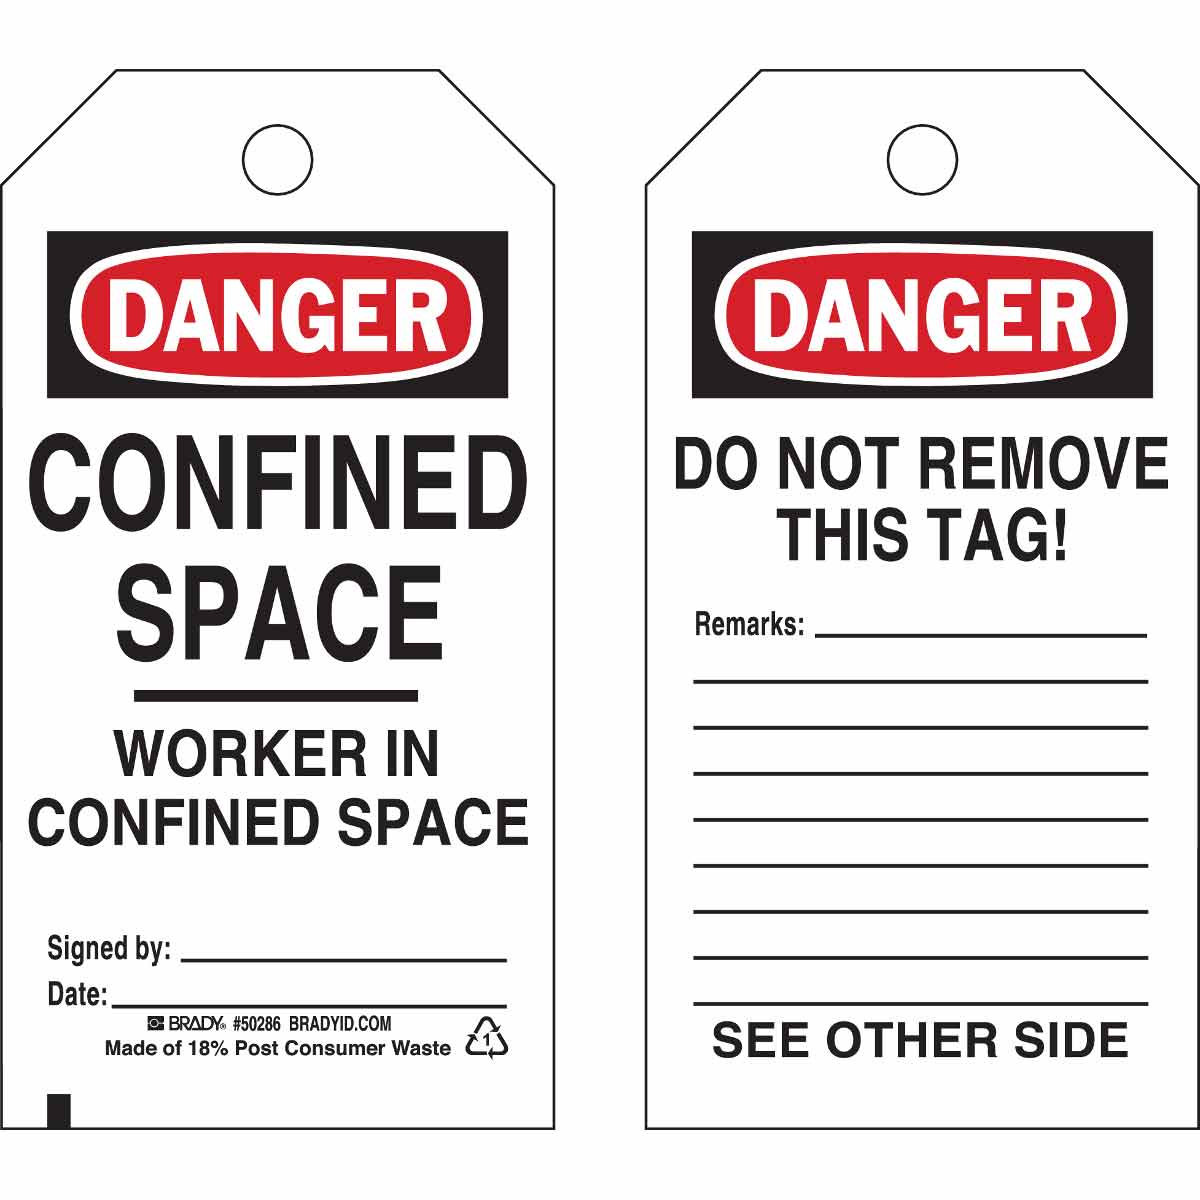 LegendPermit-Required Confined Space Do Not Enter Brady 87768 5 Width X 3-1/2 Height B-302 Polyester HeaderDanger Black and Red on White Confined Space Sign